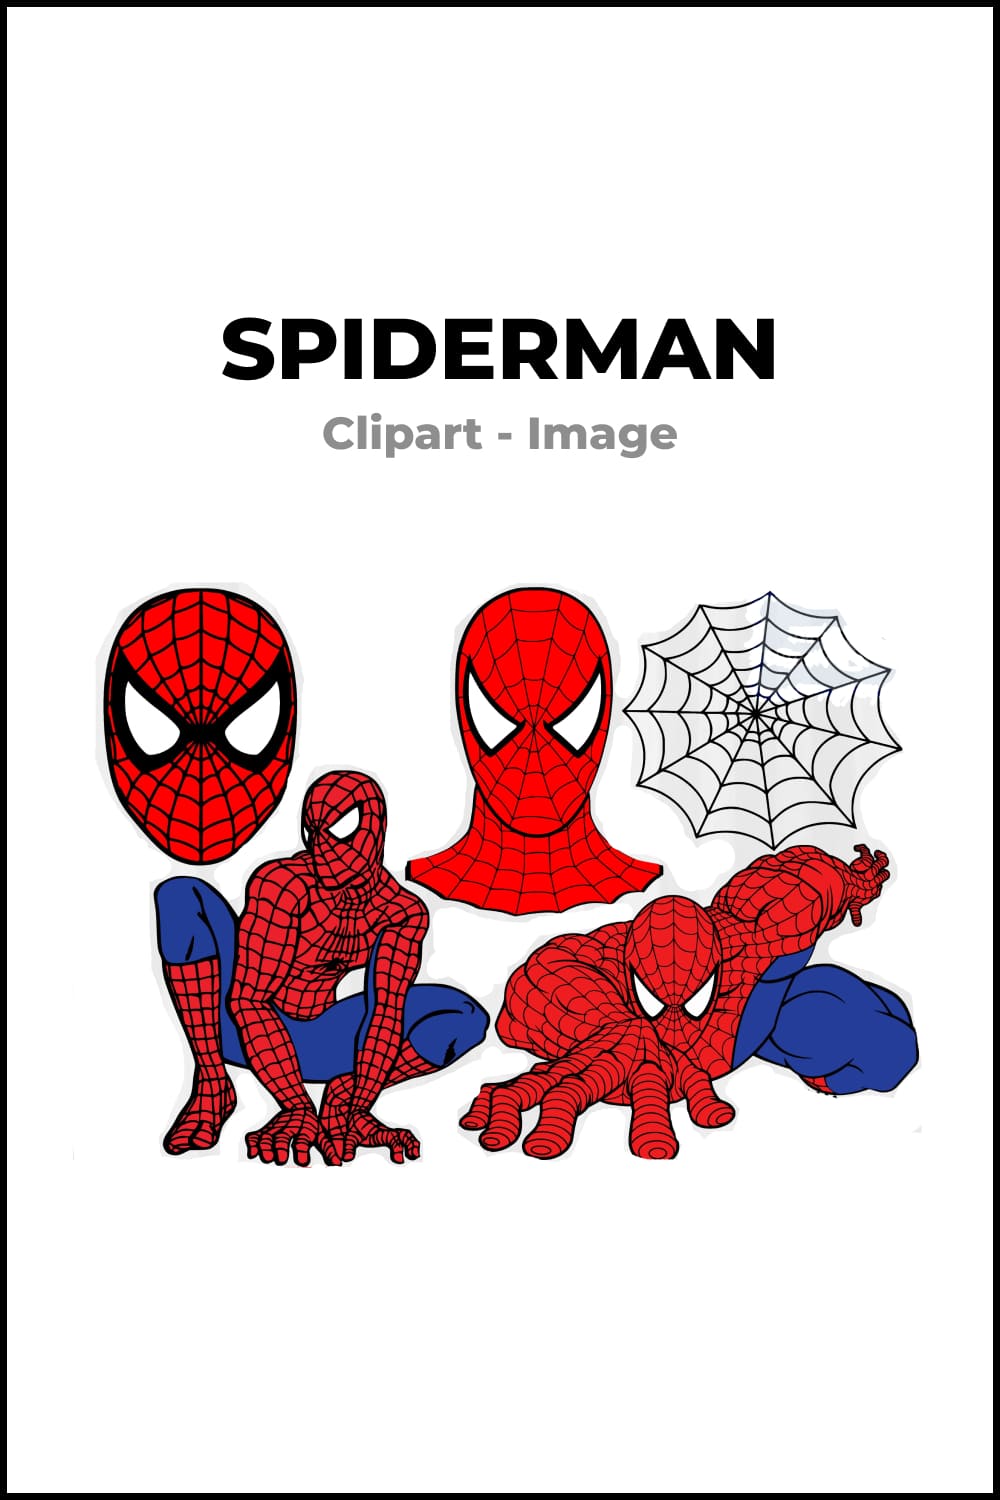 Collage with Spiderman Clipart - Image.